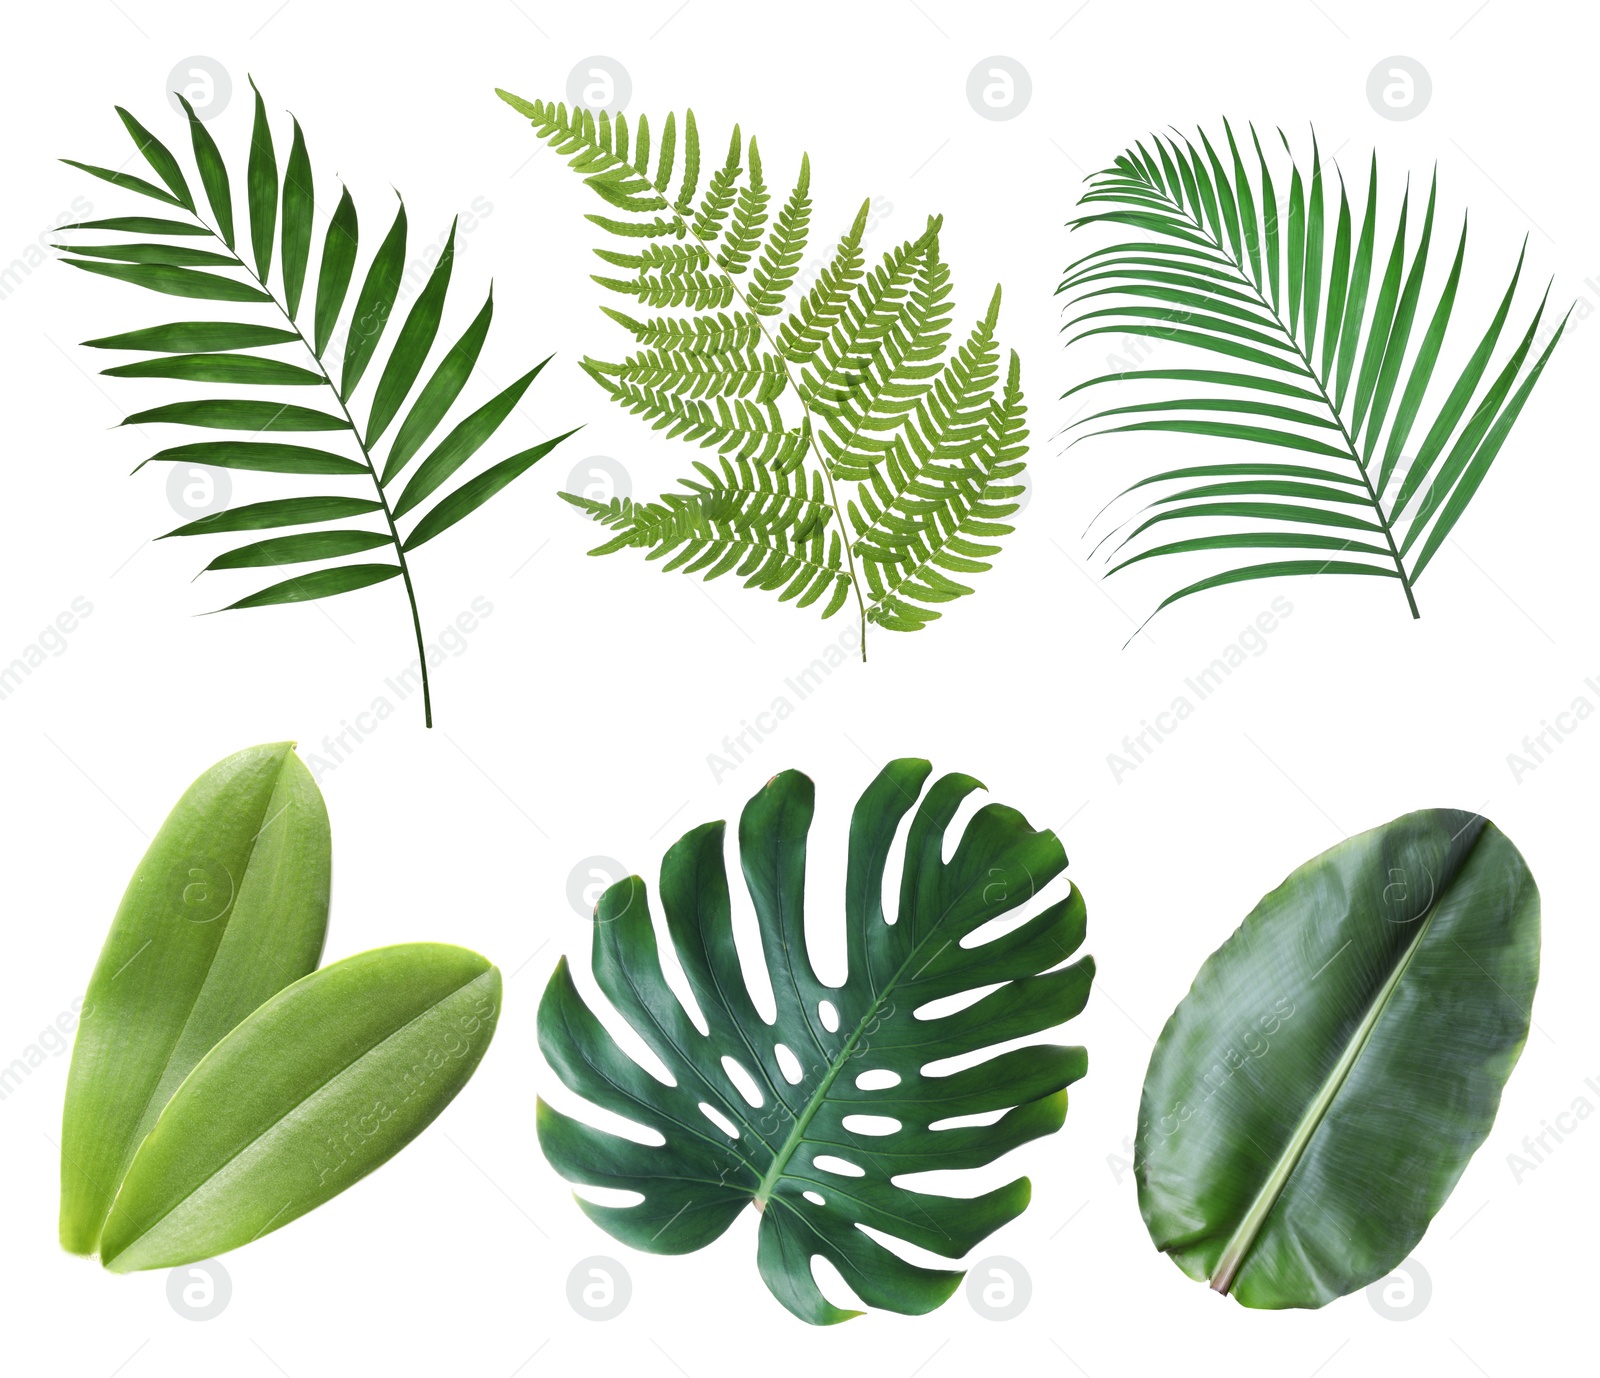 Image of Set with beautiful fern and other tropical leaves on white background 